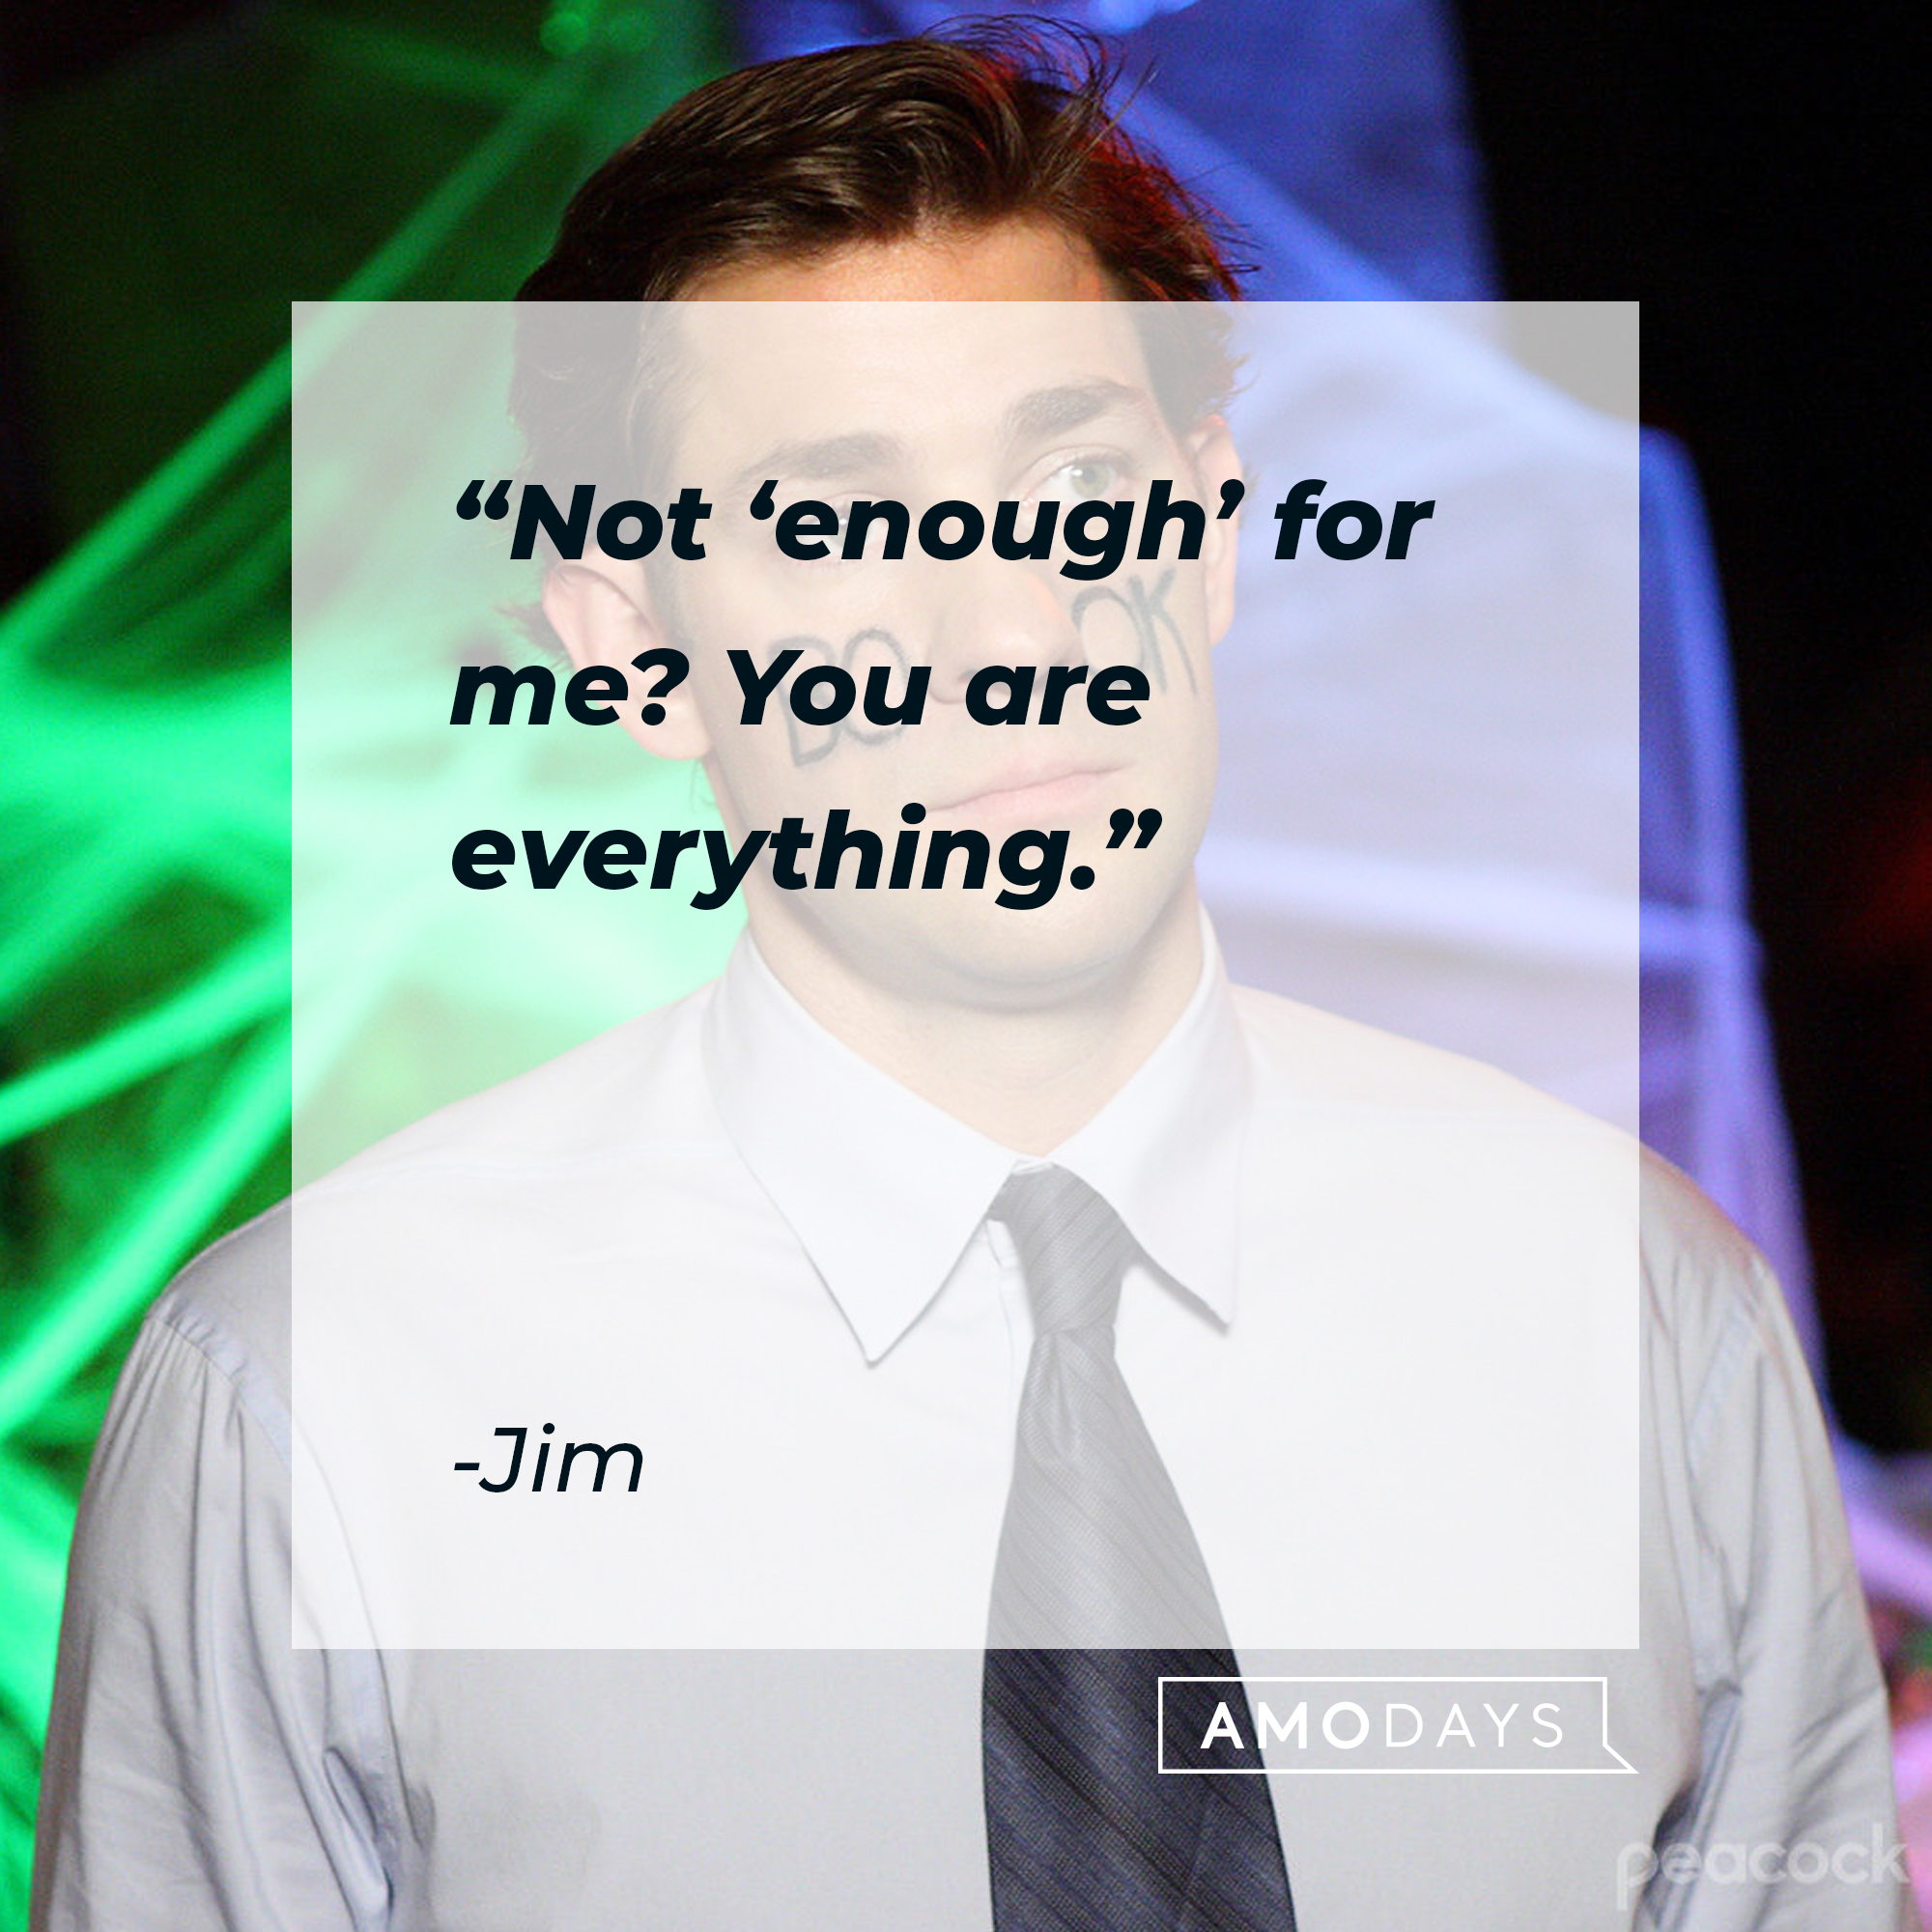 Jim with his quote, "Not 'enough' for me? You are everything." | Source: Facebook/TheOfficeTV